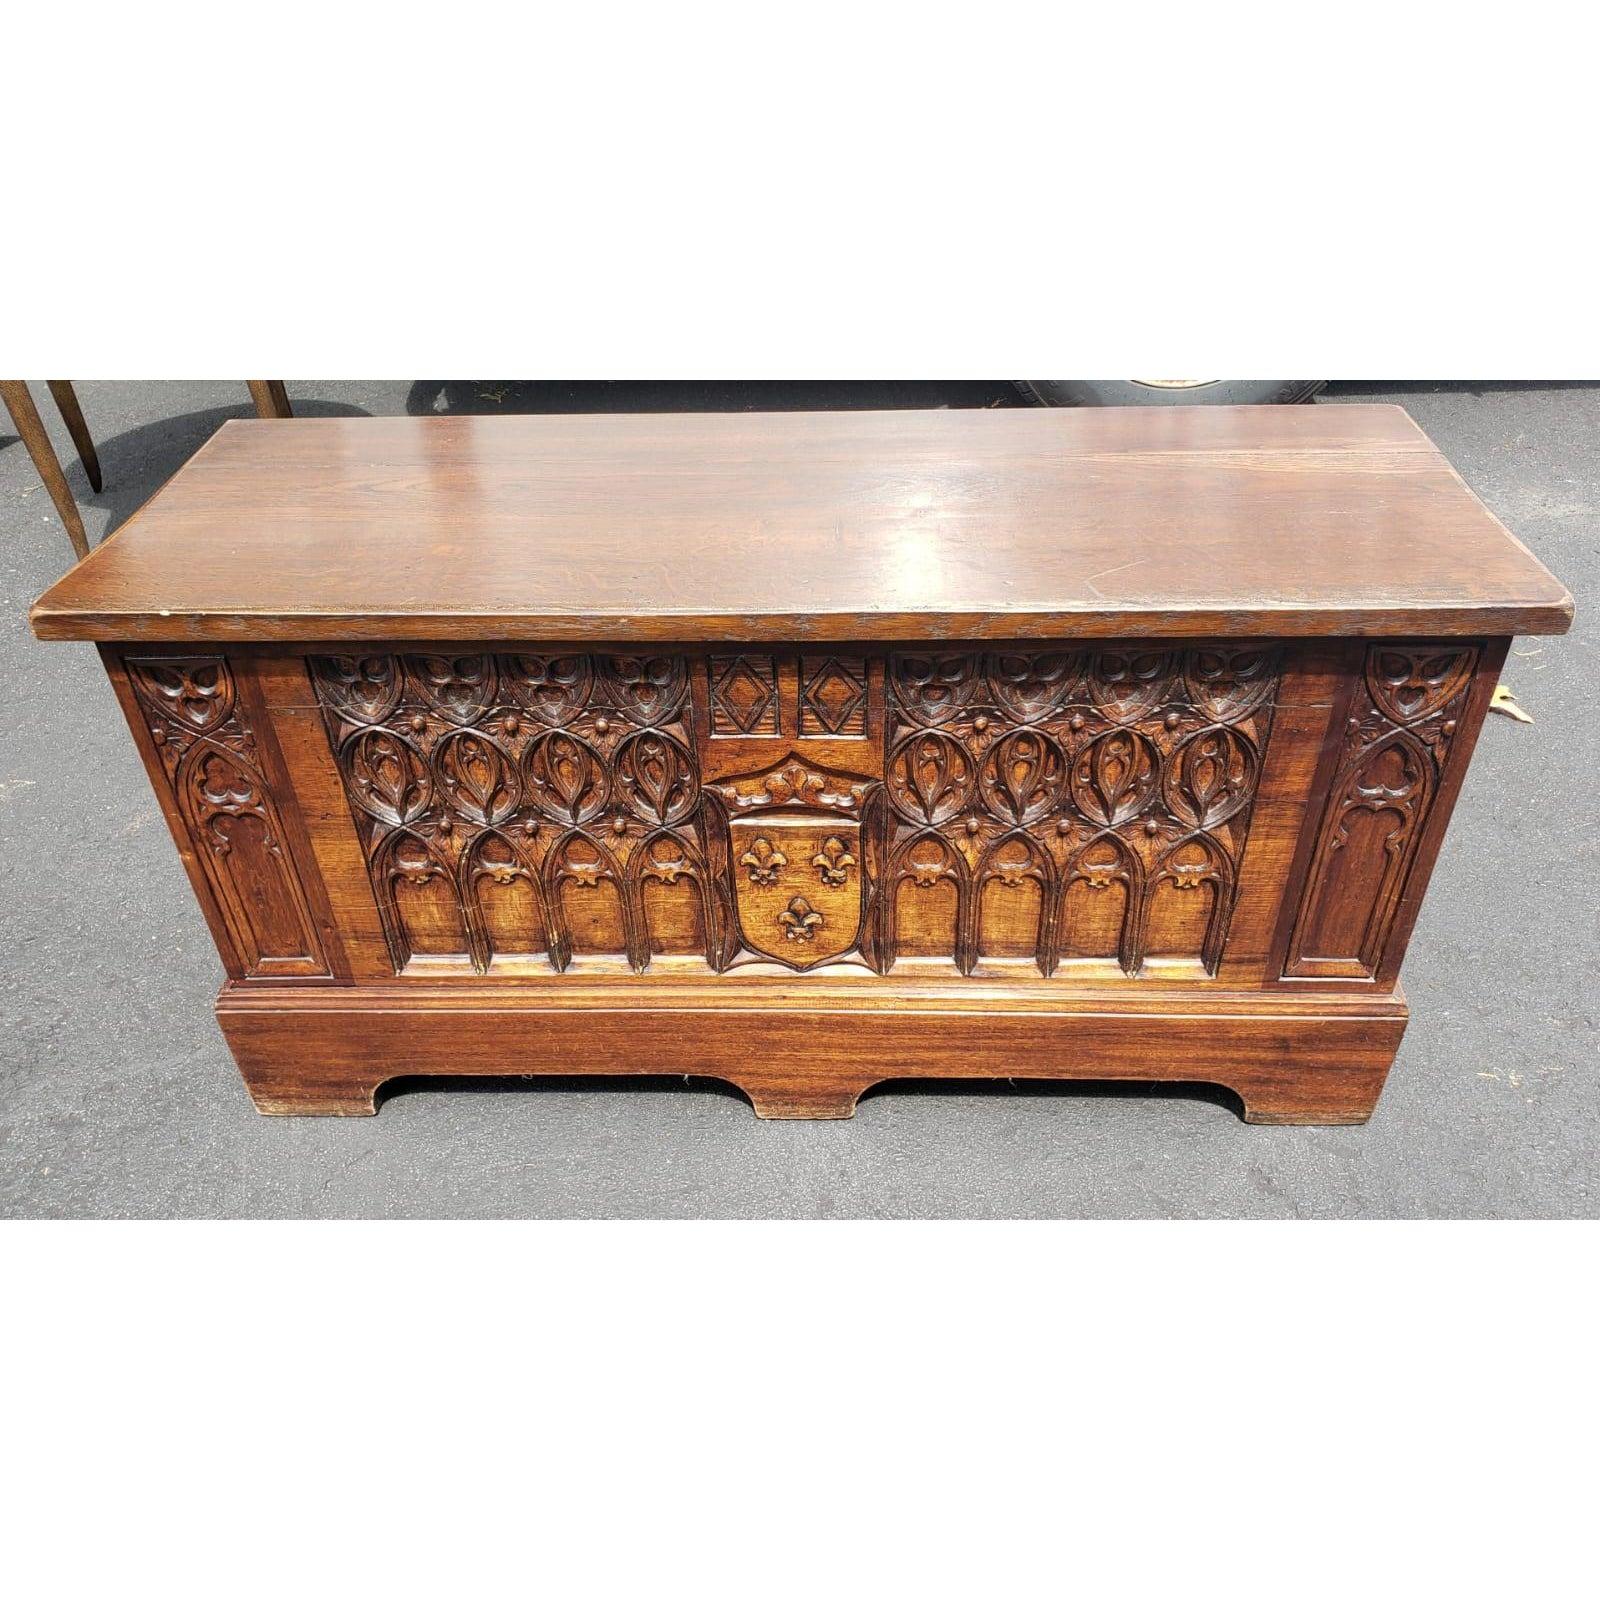 Large 48 inches one of a kind antique carved wood chest / trunk / cedar chest. Features intricate hand carved details and a unique style and character. Solid carved wood frame and with great patina and finish. Spacious enough to hold many items and